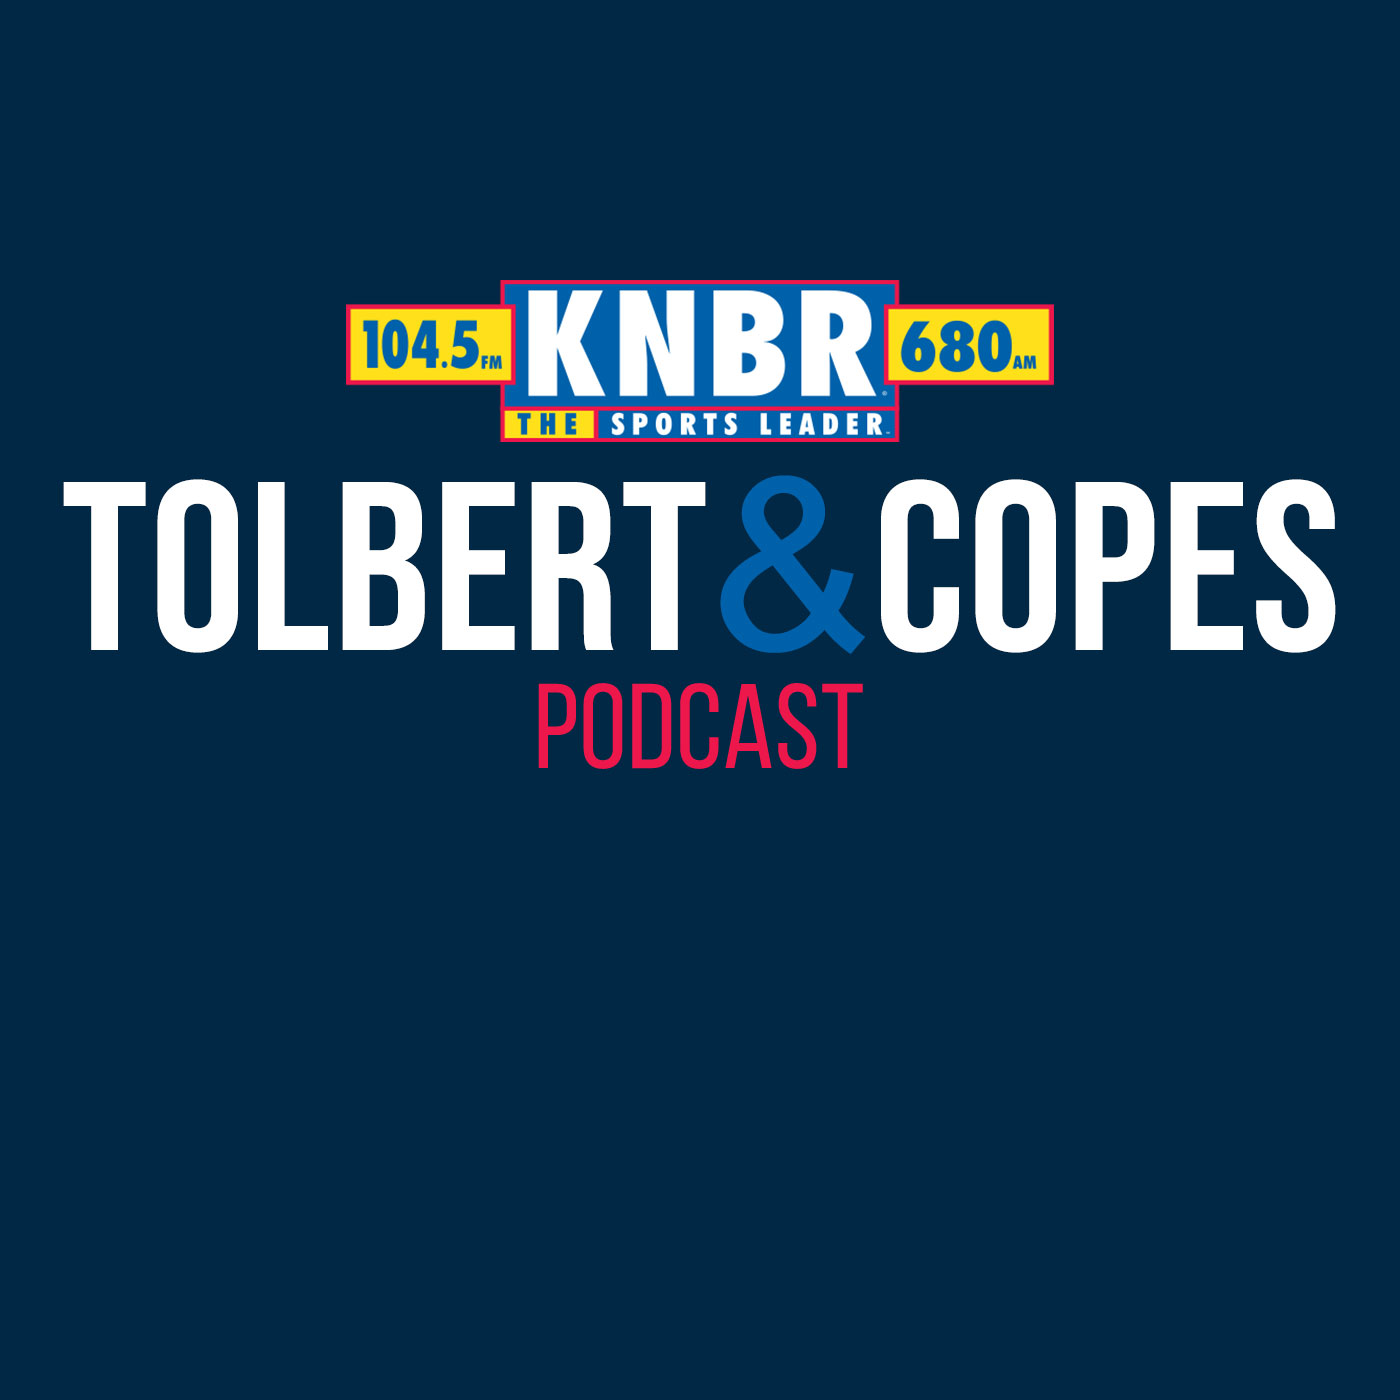 4-23 Greg Cosell joins Tolbert & Copes to analyze some of this year's draft prospects